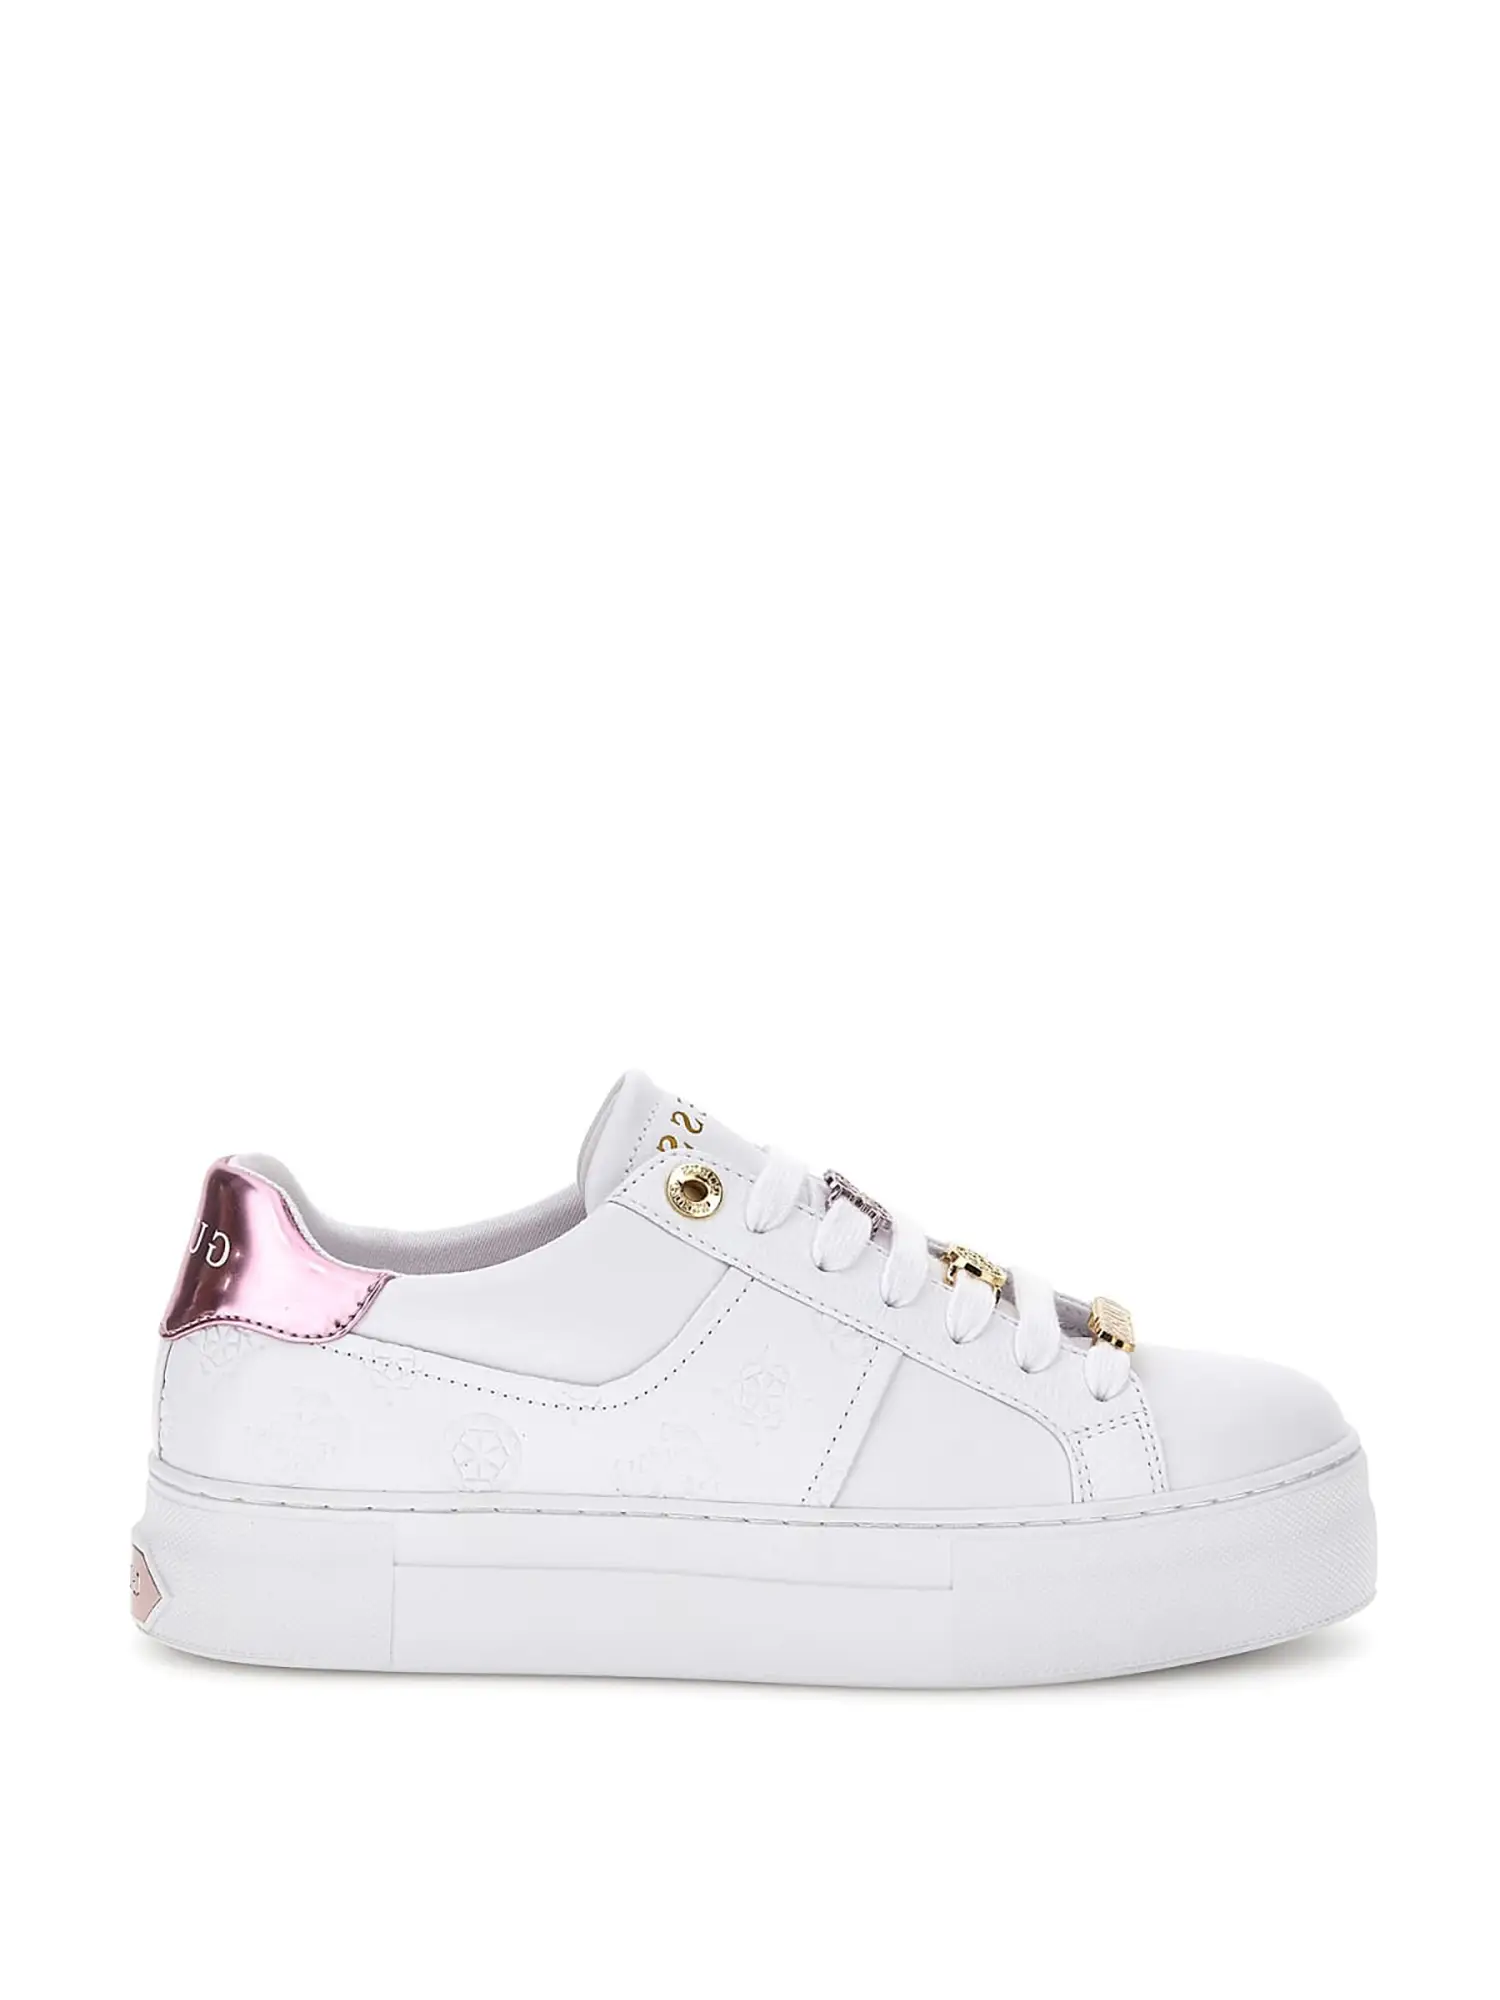 SNEAKERS DONNA - GUESS - FLJGIE FAL12 - BIANCO/ROSA, 40